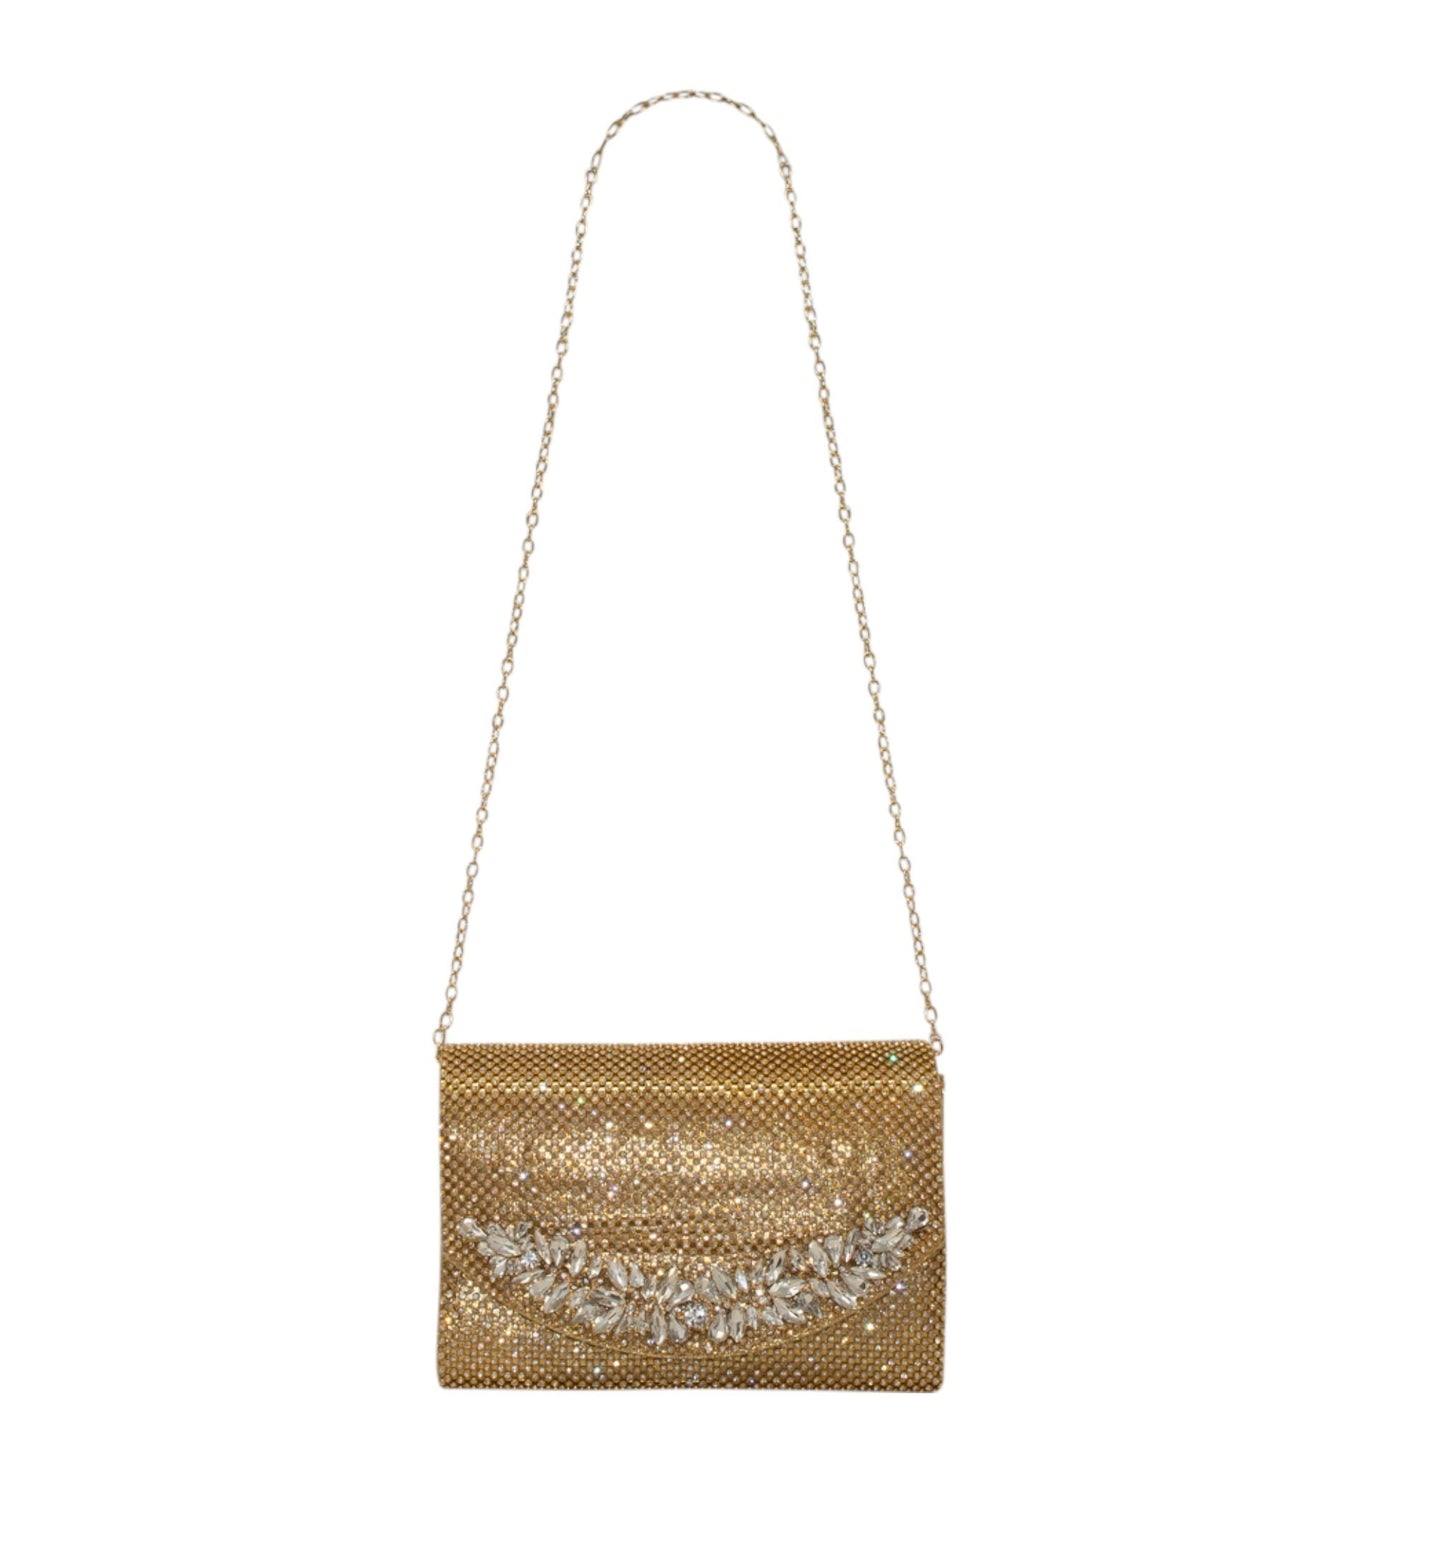 Sparkly Gold Clutch Bag Wedding Event Clutch Bag Shoulder Bag perfect eye-catching Silver Diamante Bridesmaid Gift Present Wedding Party